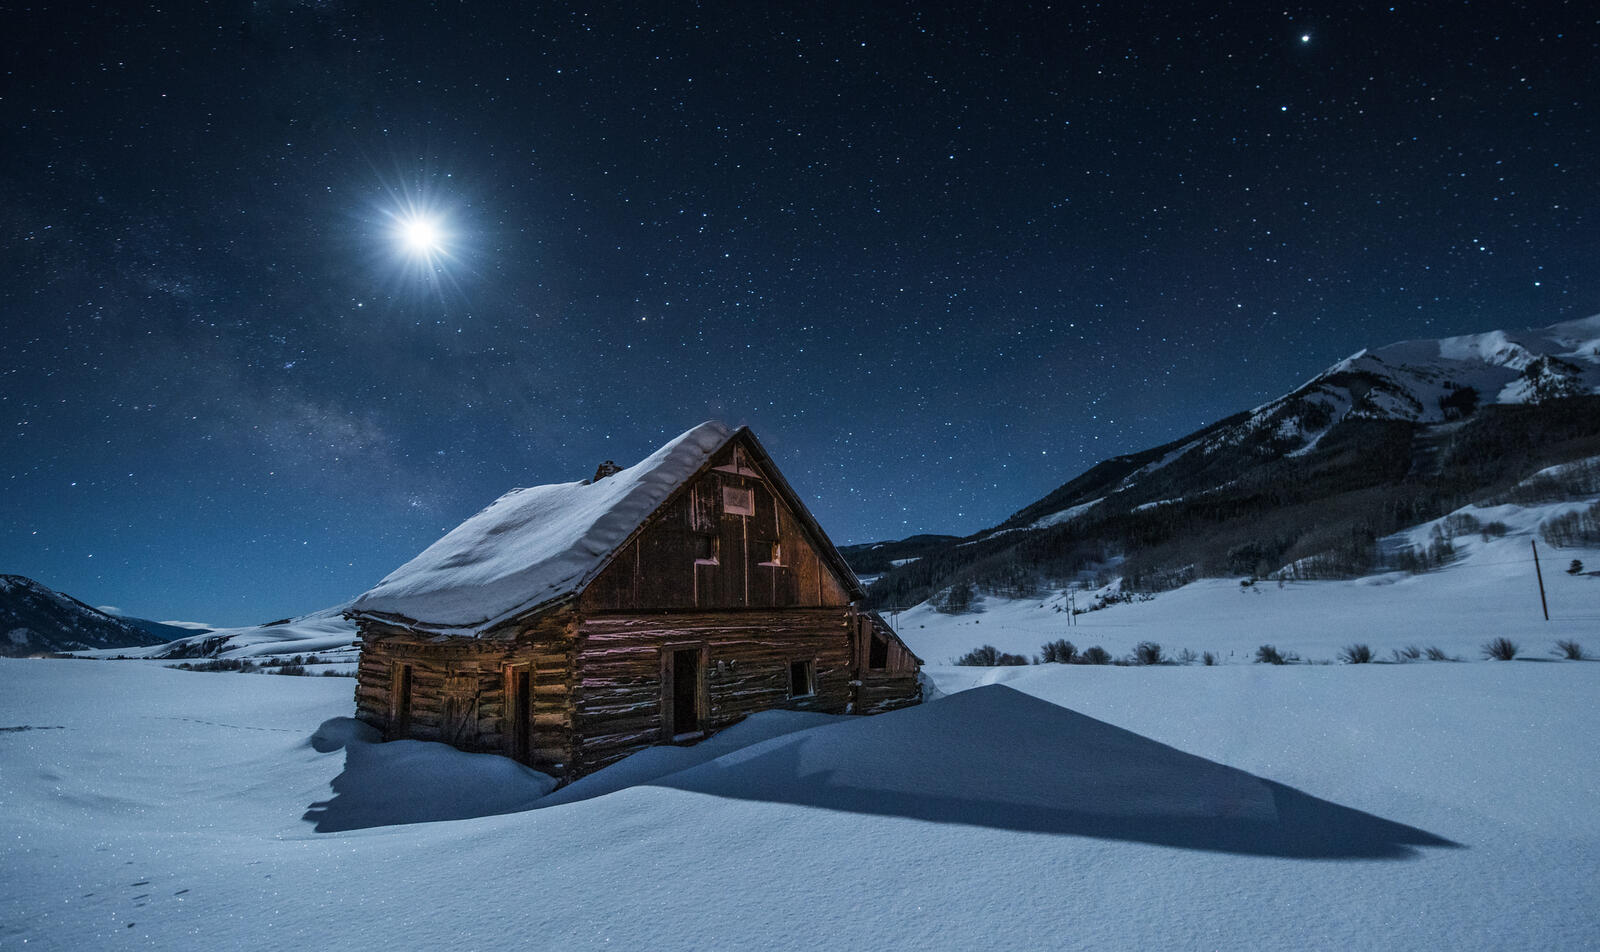 Wallpapers Crested Butte Colorado winter on the desktop